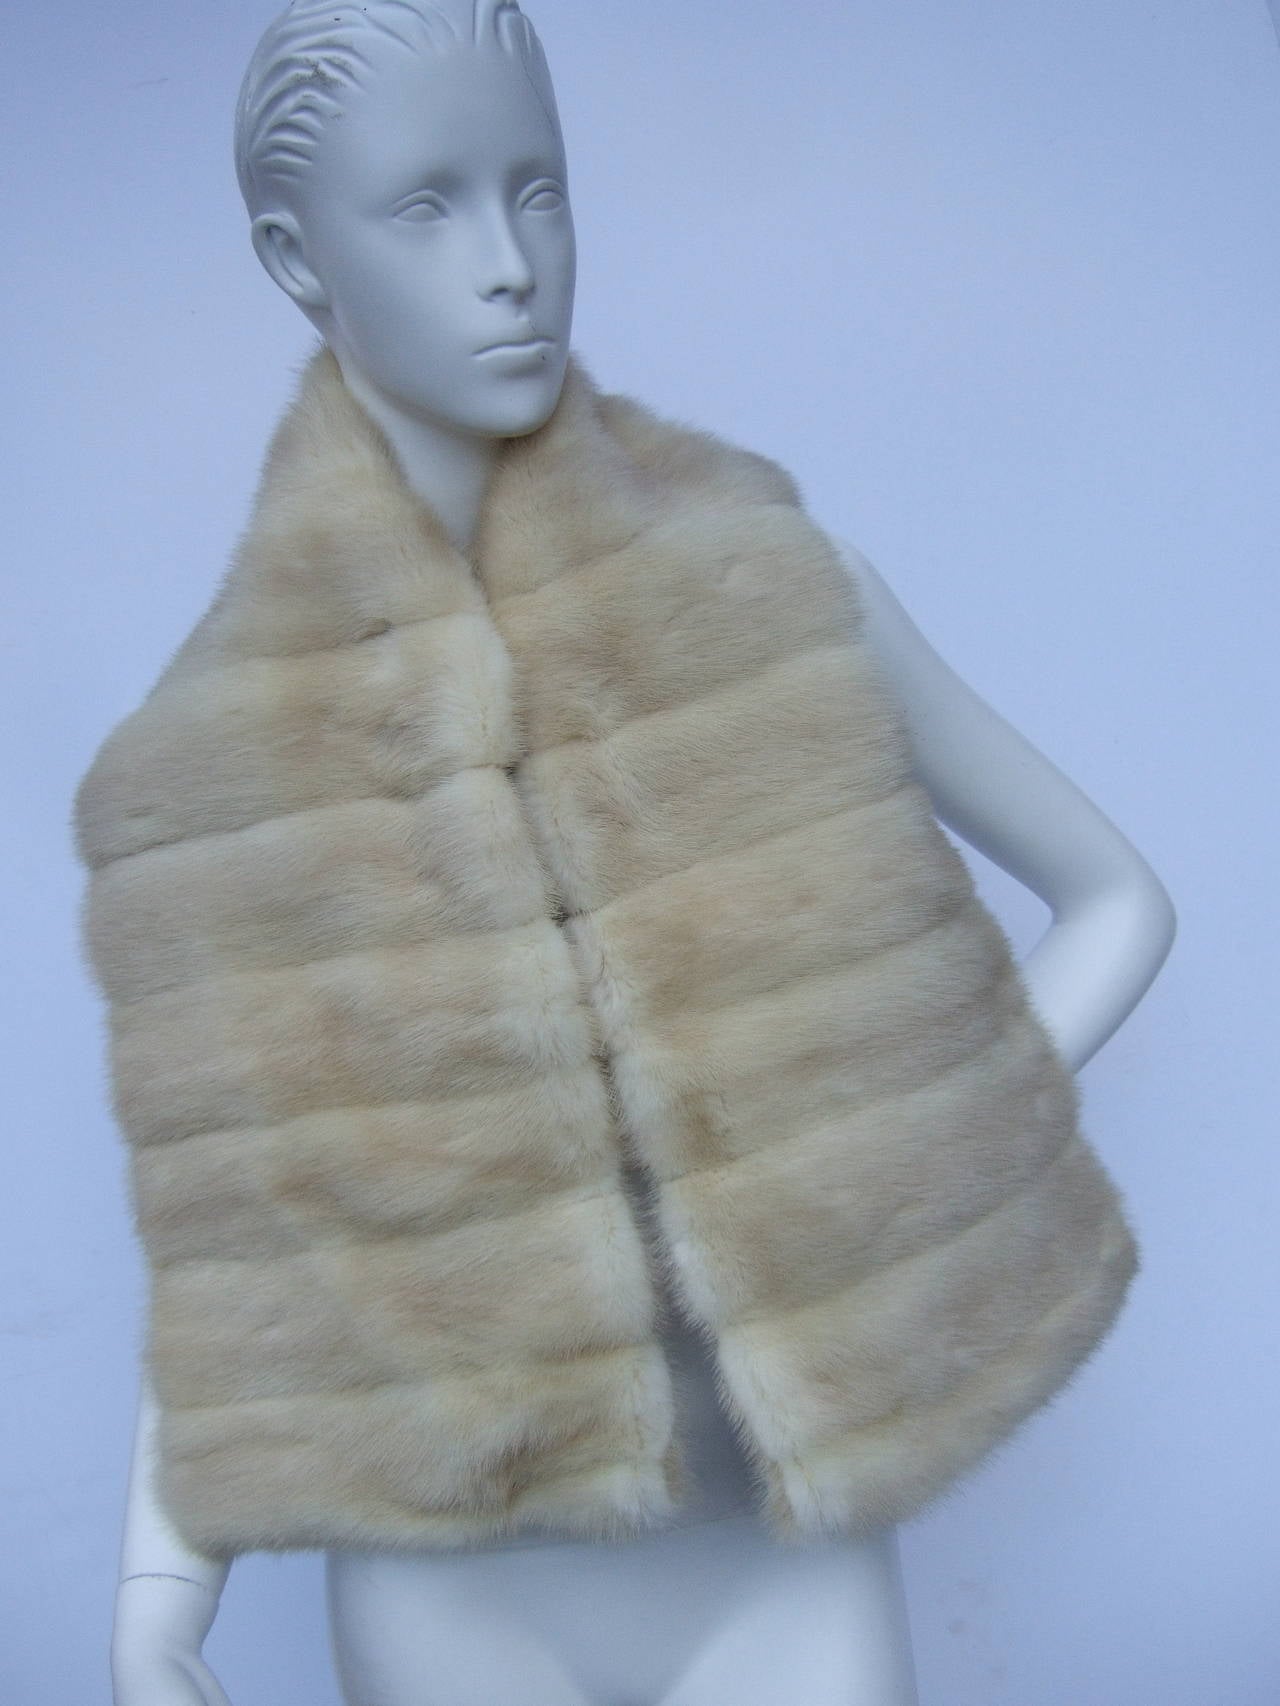 Luxurious oblong blonde mink wrap c 1960
The elegant mink is designed with bands of silky blond mink fur
The fur stole makes a very chic accessory wrapped around the
shoulders

The fur also makes a lavish accessory draped over a bench 
The